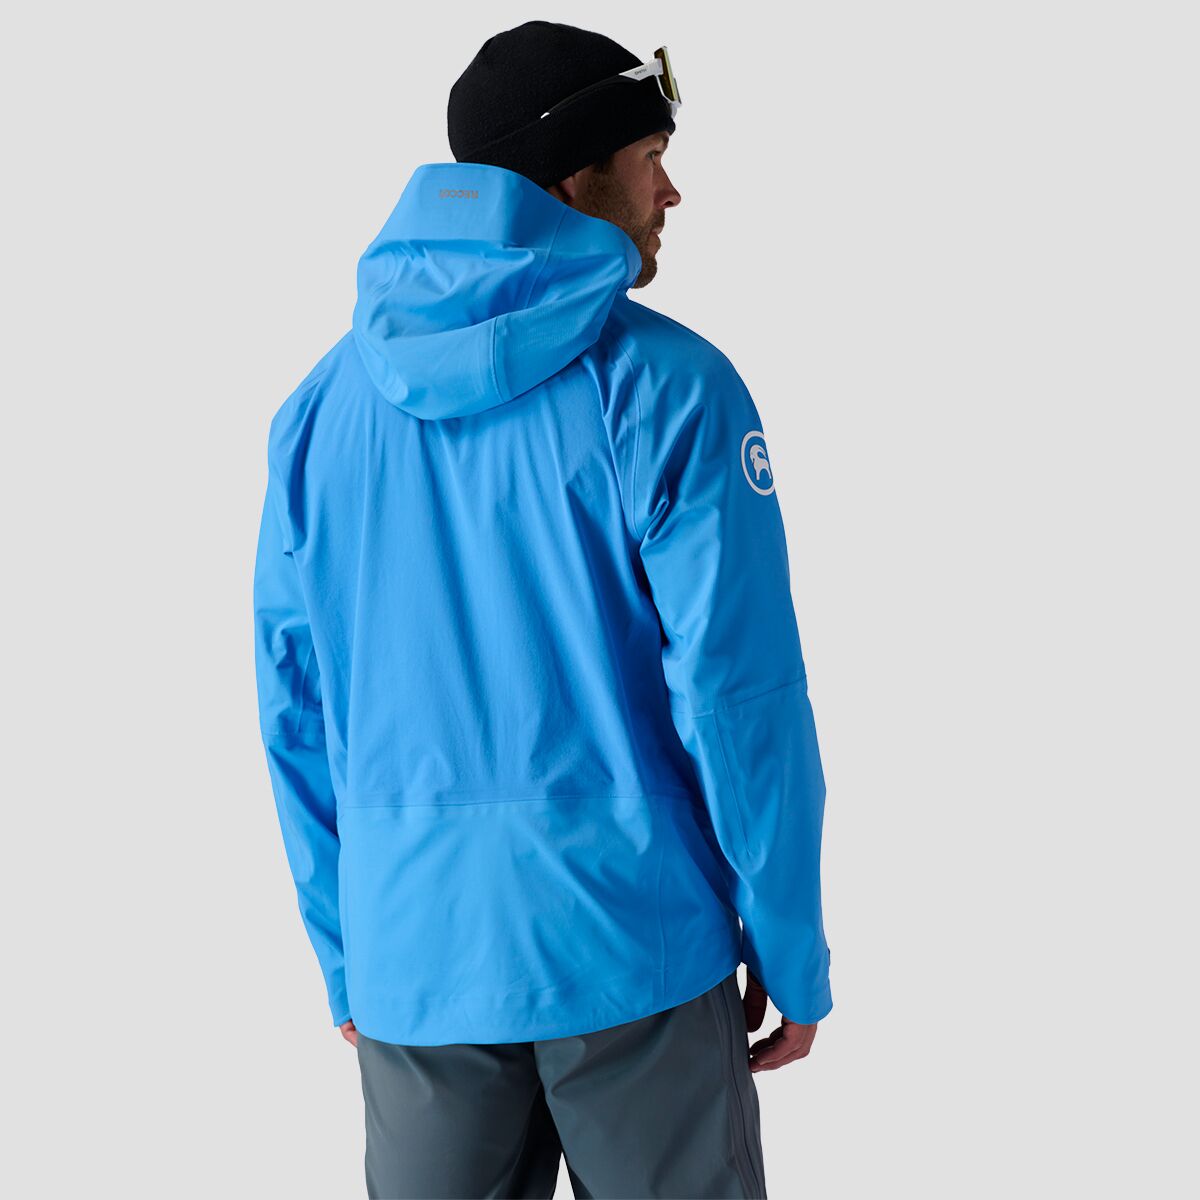 Backcountry GORE-TEX WINDSTOPPER Hybrid Touring Jacket - Men's - Clothing